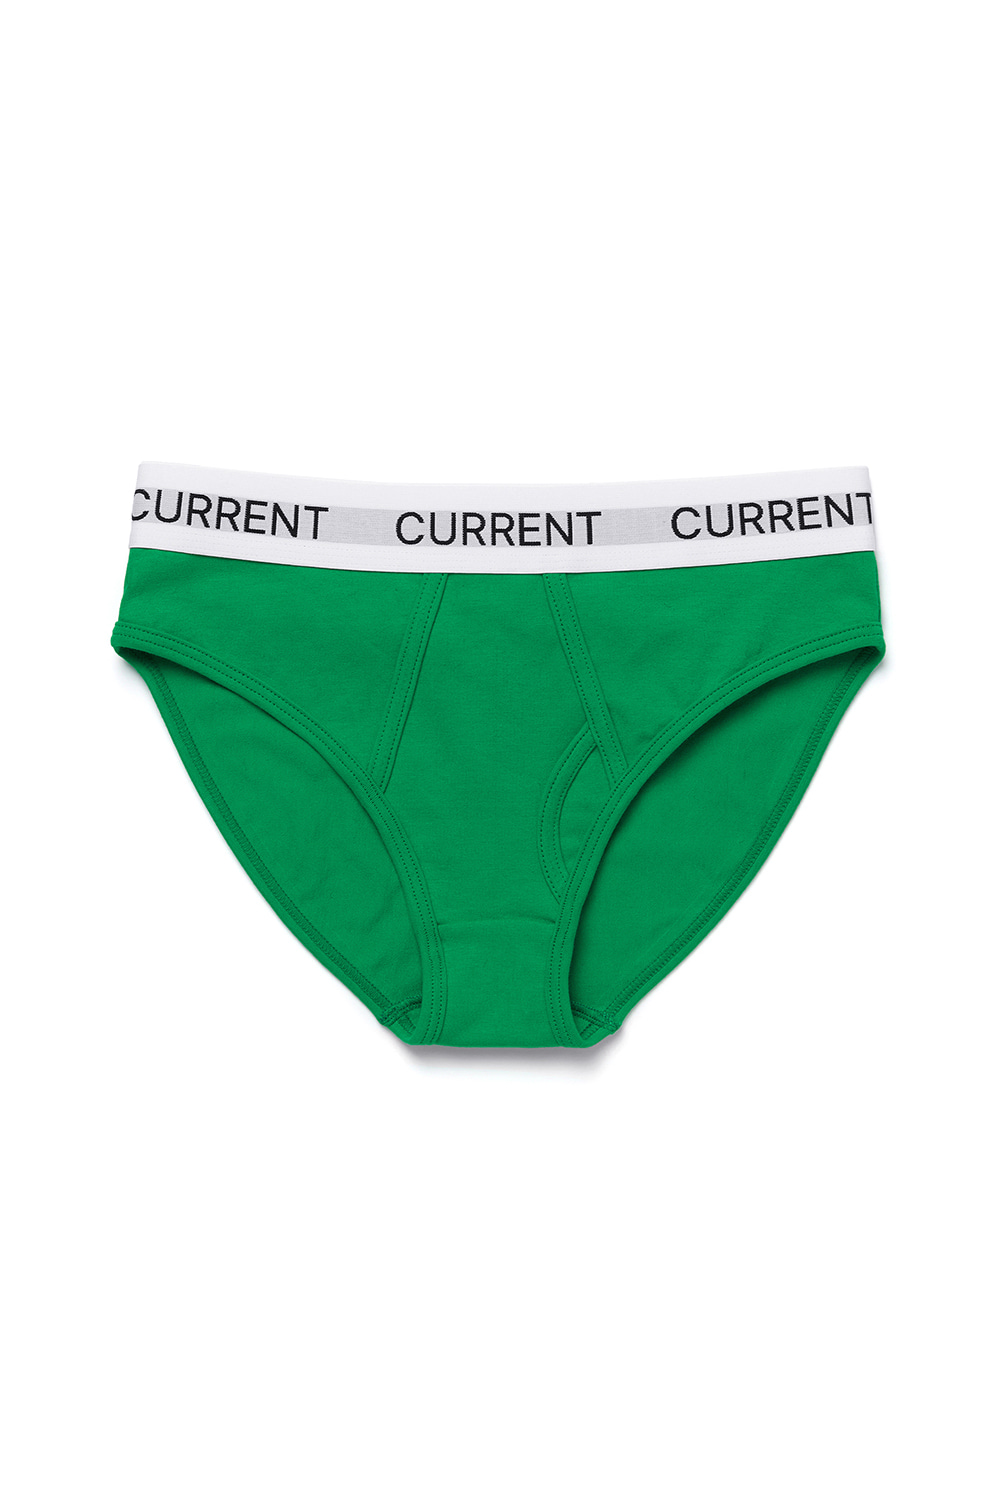 CURRENT EASY BANDING BRIEF [GREEN/BROWN]_2PACK		